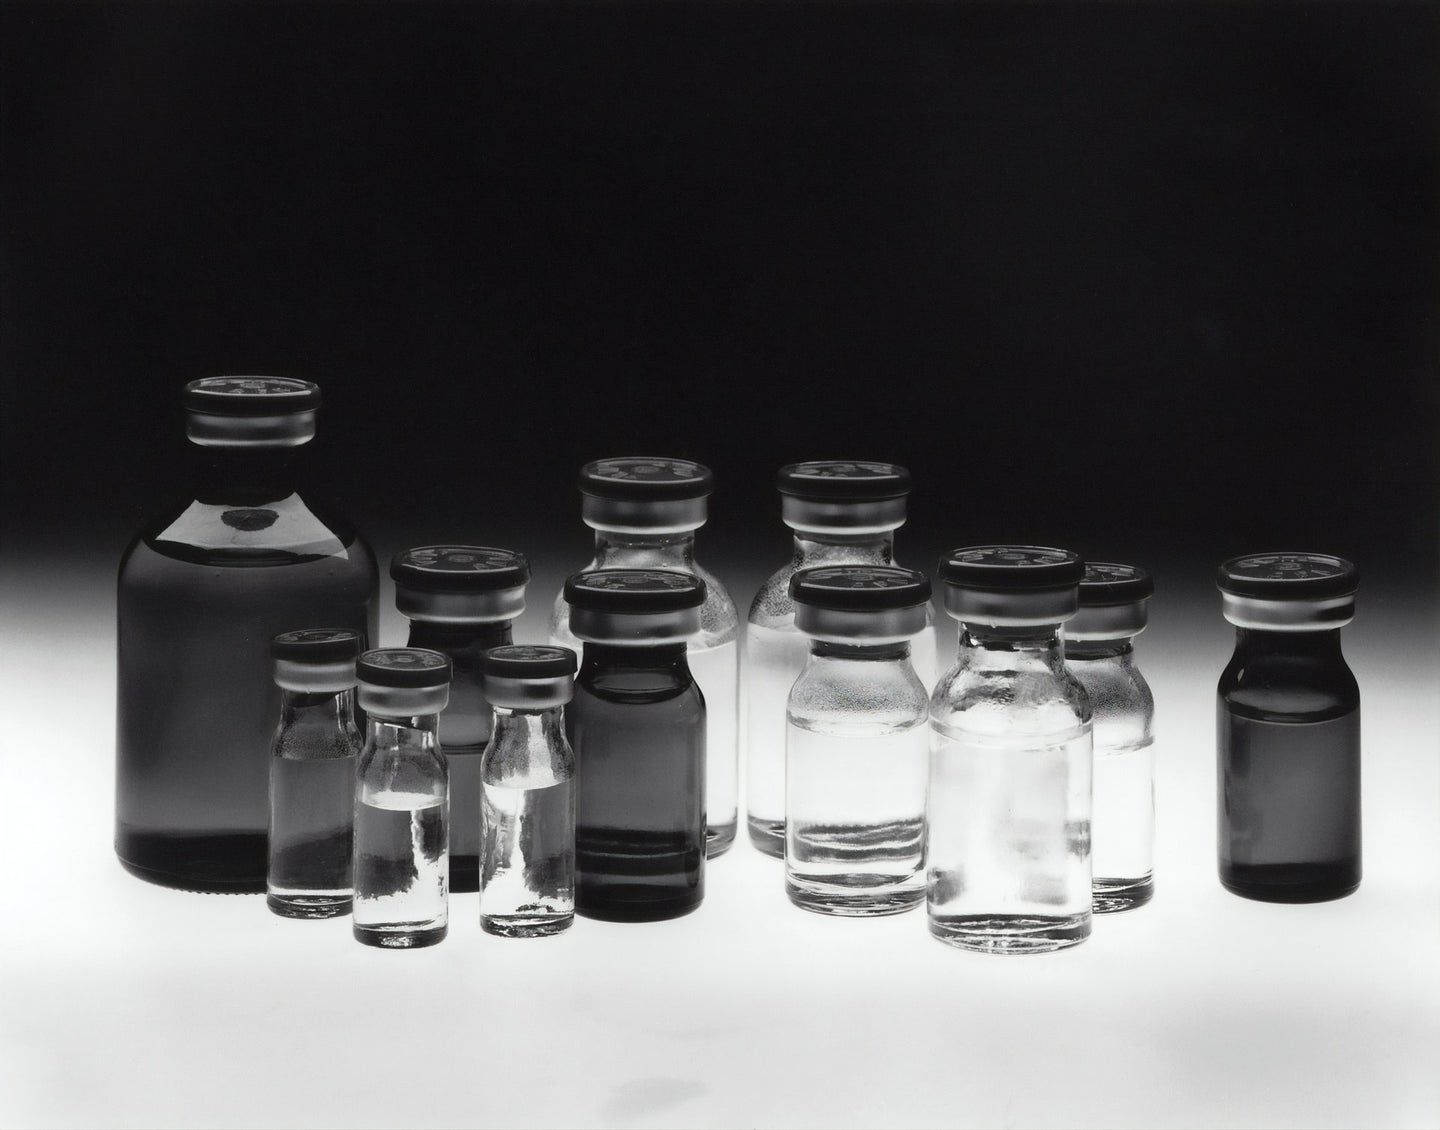 Chemotherapy-drug bottles in black and white